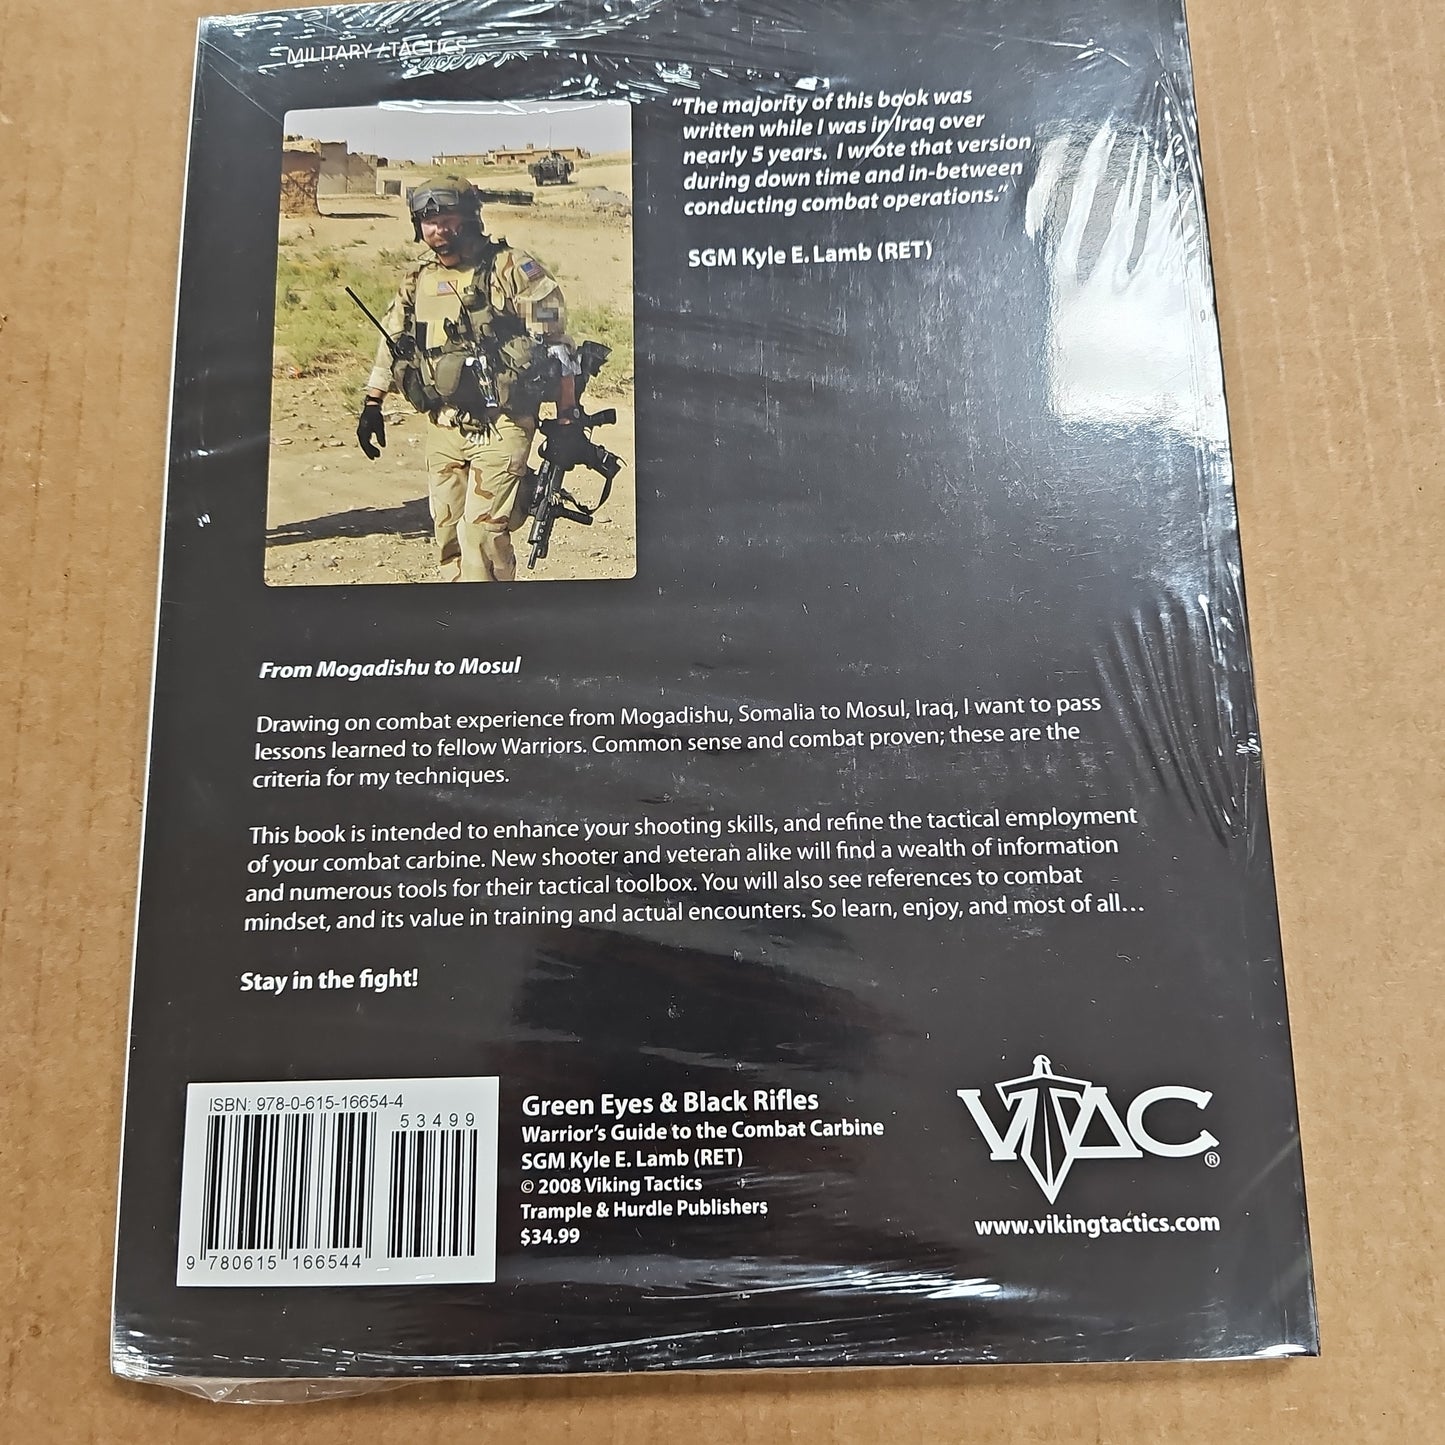 Green Eyes & Black Rifles: Warriors Guide to the Combat Carb VTAC-GEBR